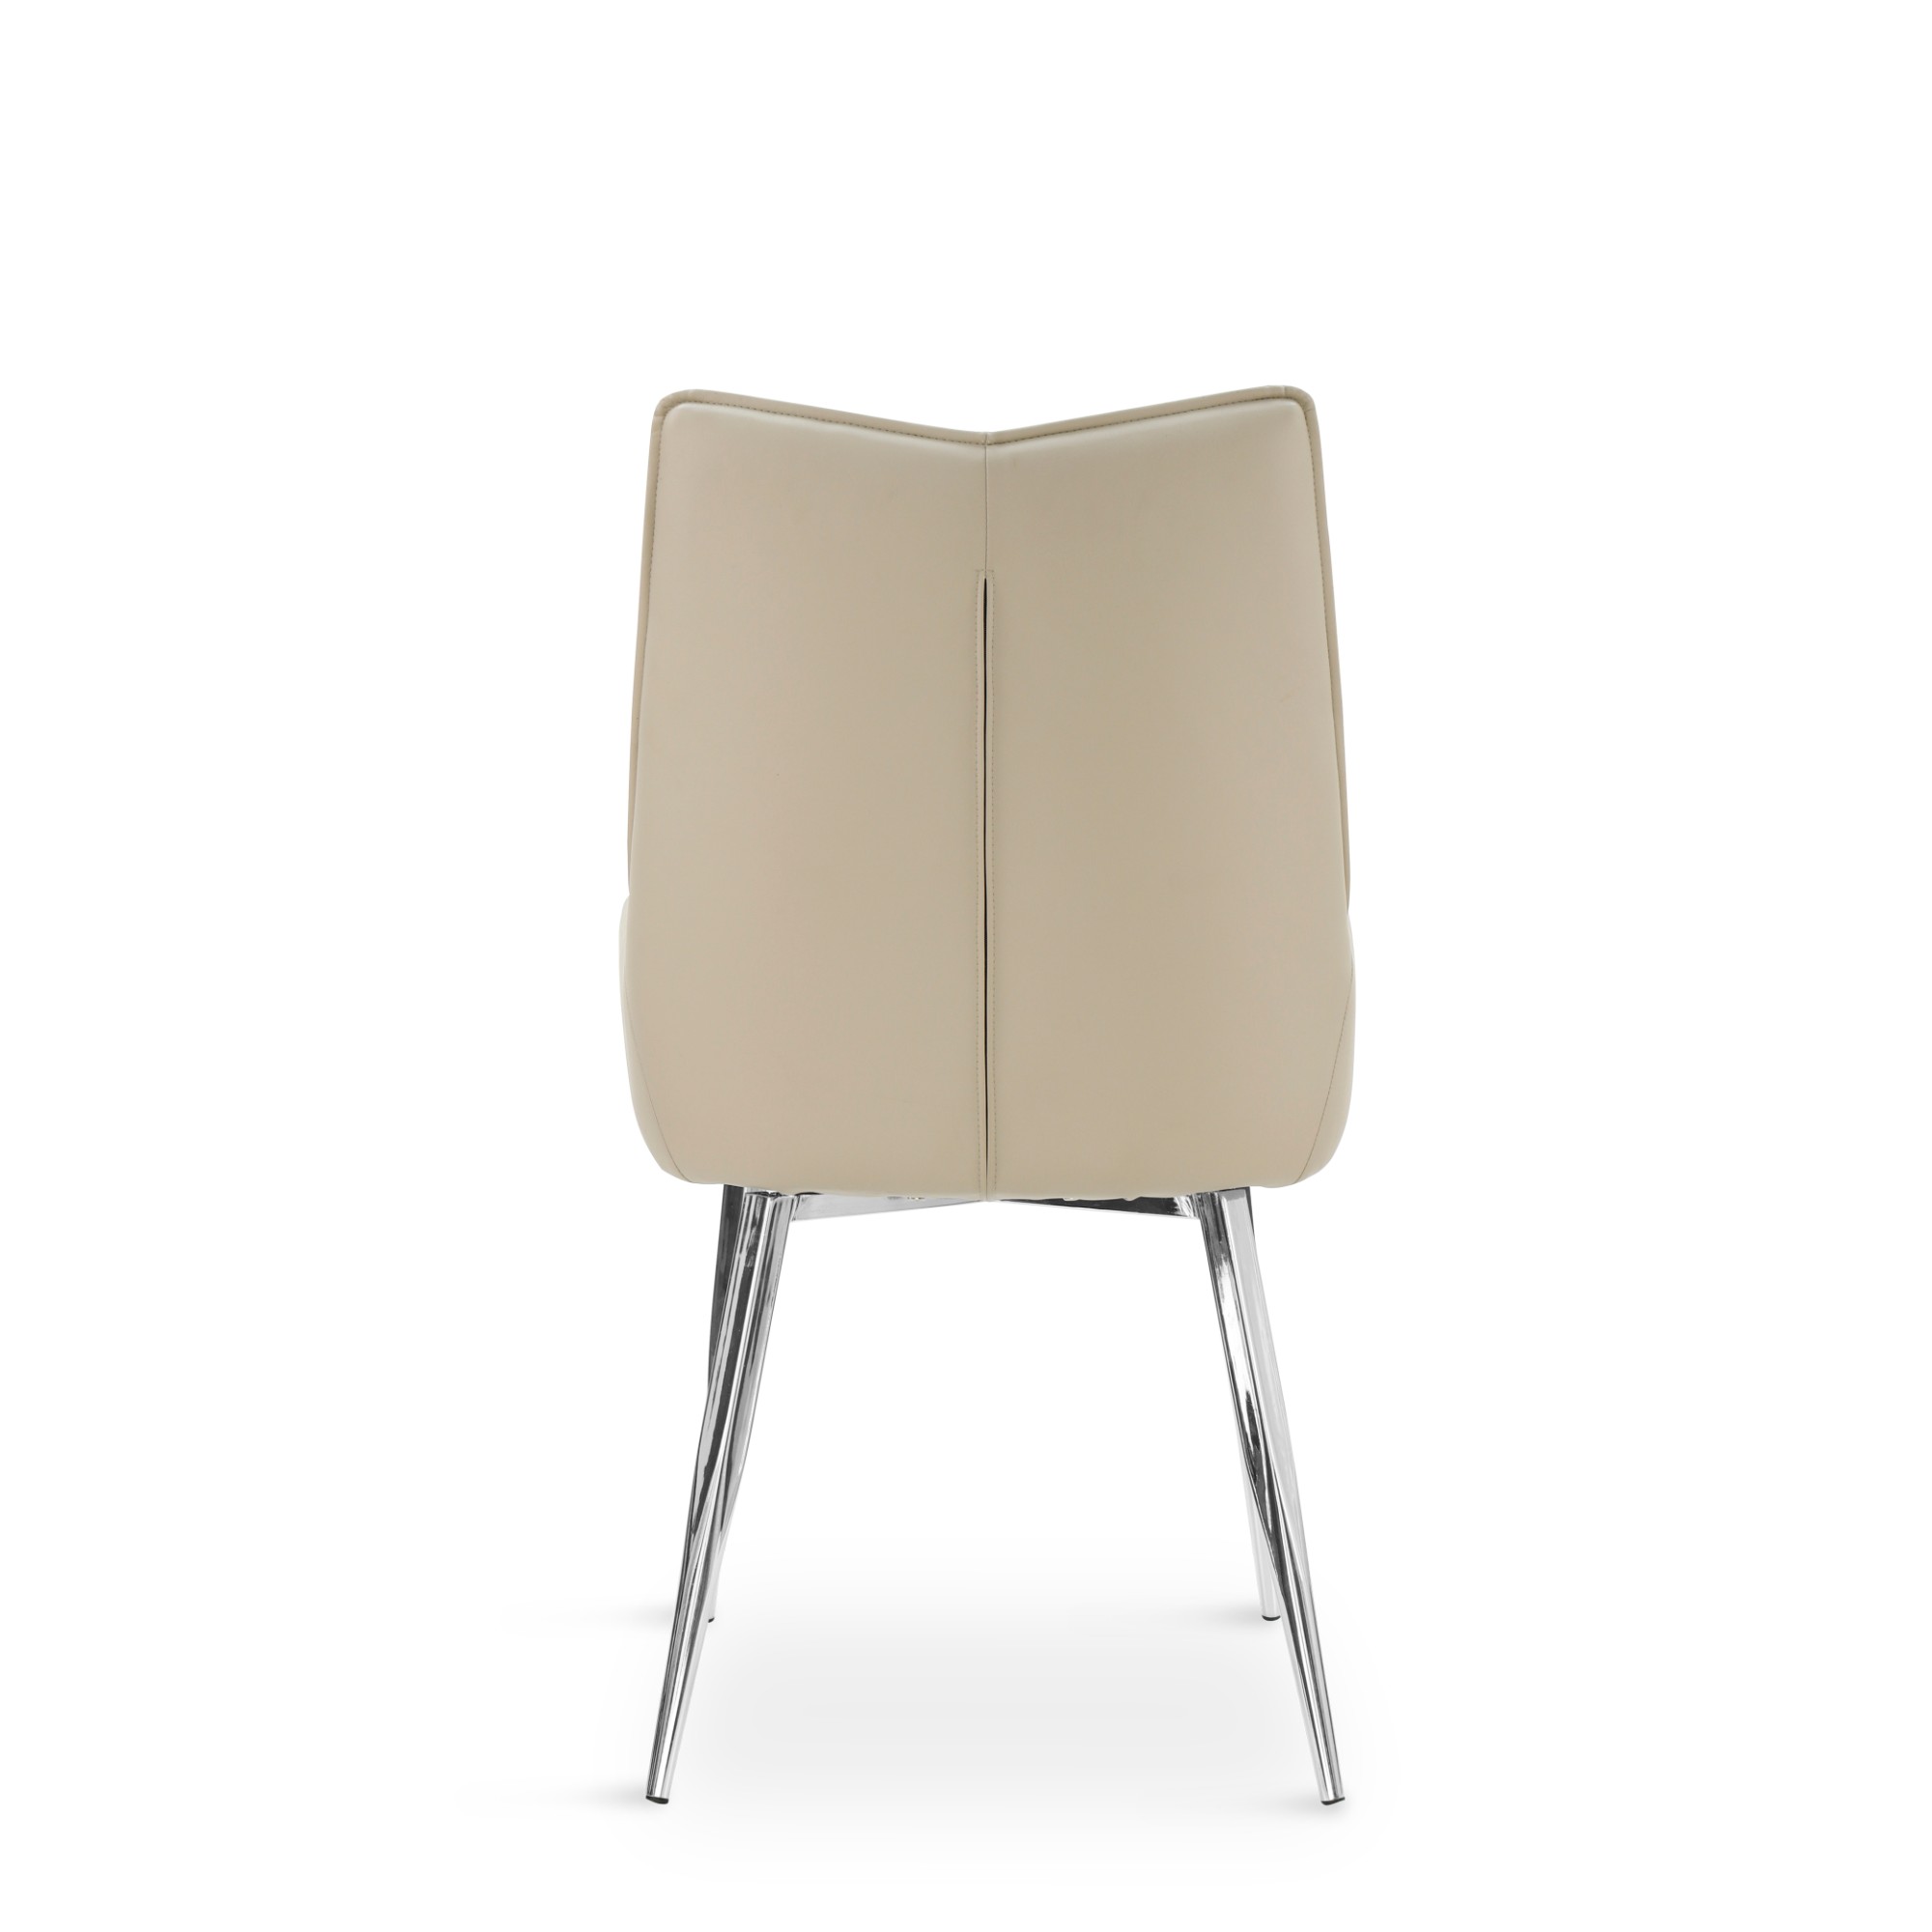 Beige PU Dining Chair with Chromed Legs for Dining Room